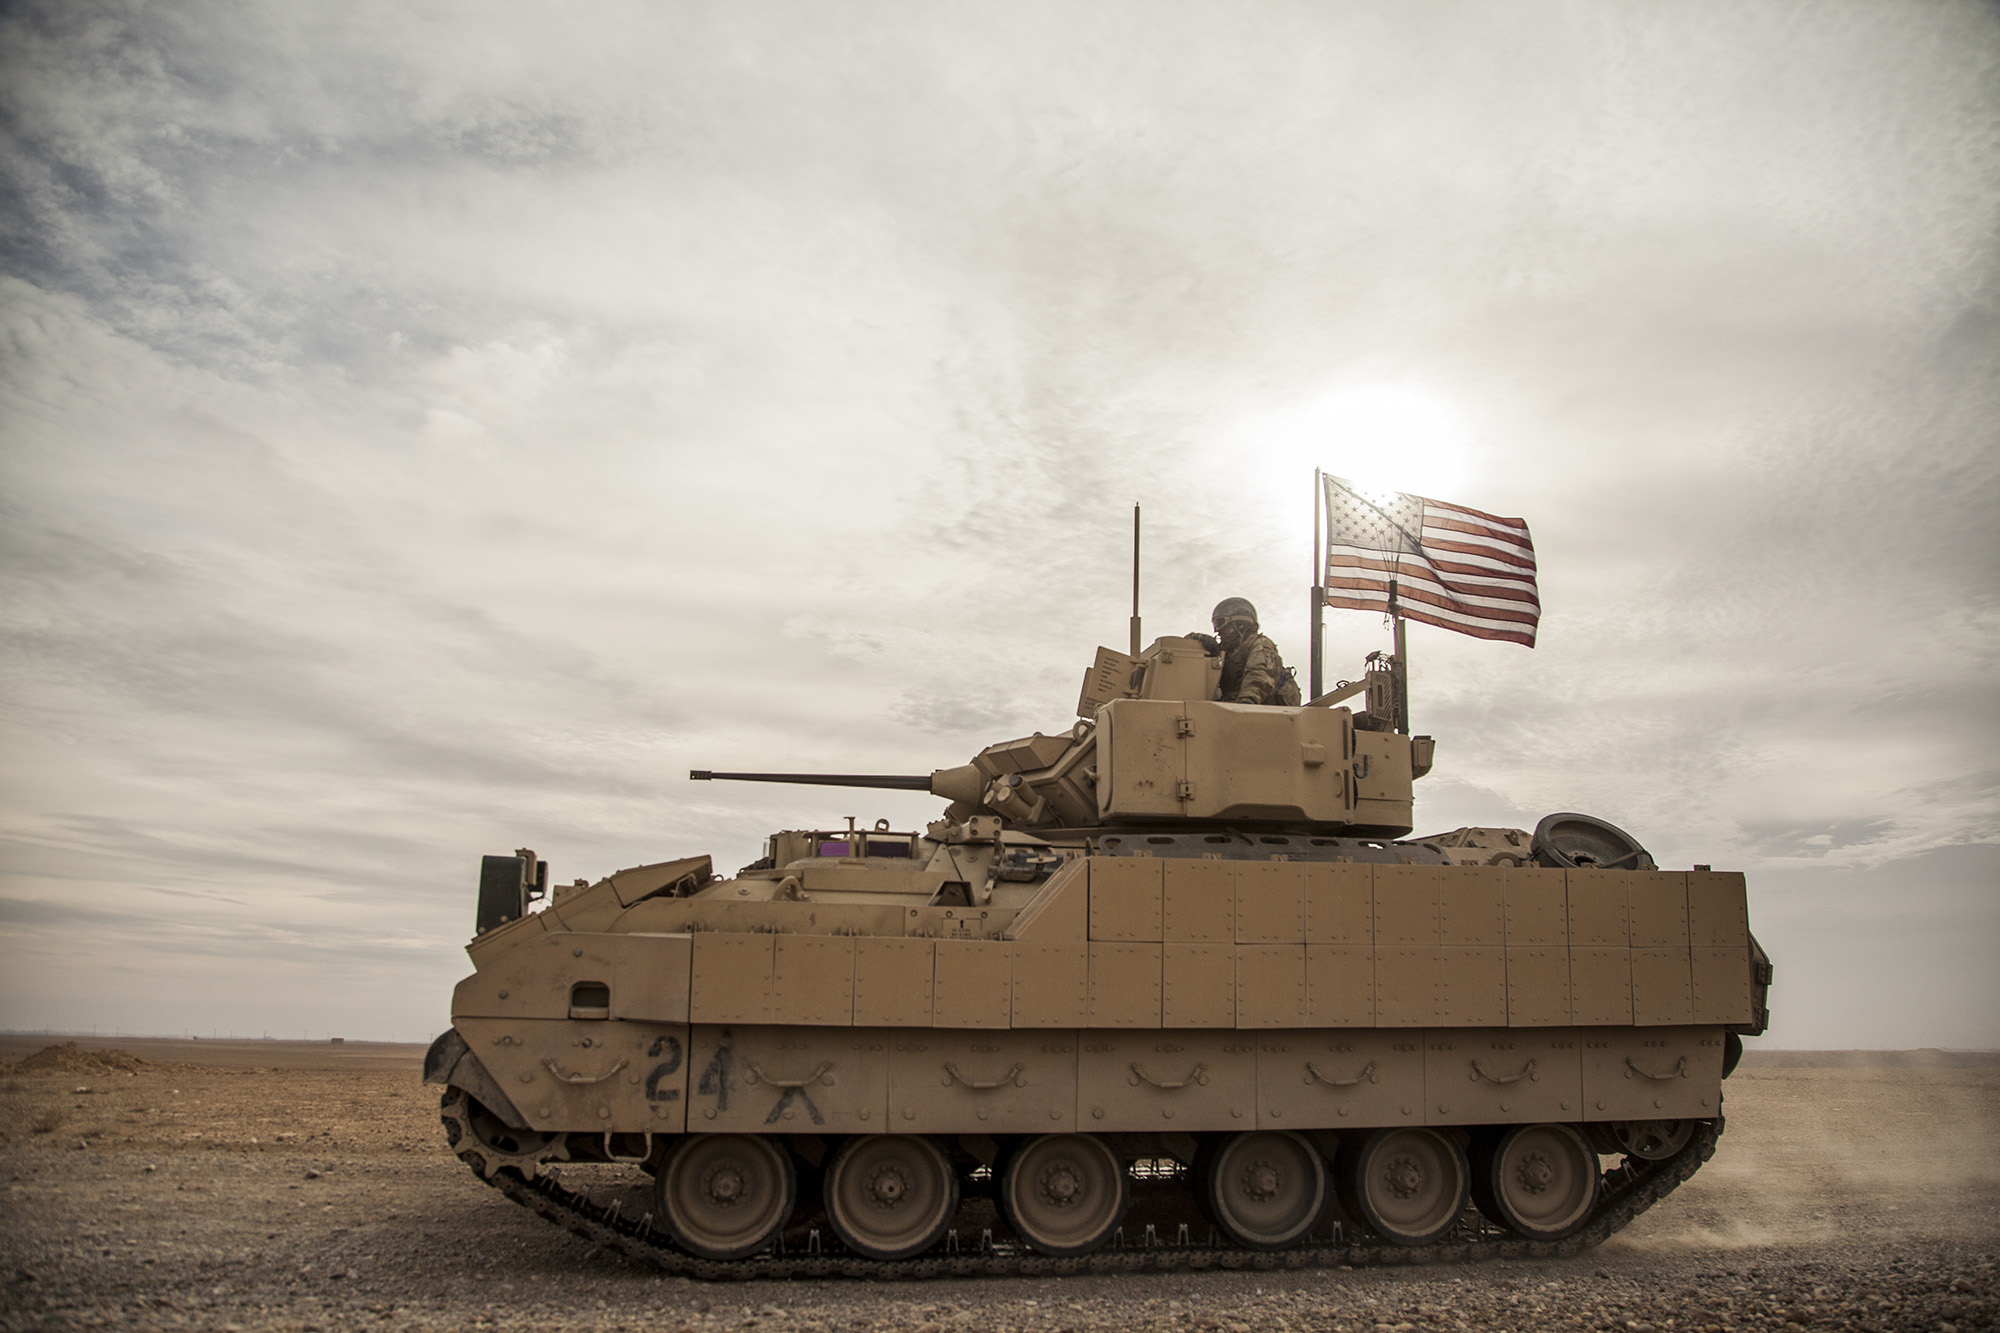 American soldiers drive a Bradley fighting vehicle during a joint exercise with Syrian Democratic Forces in Deir Ezzor in northeastern Syria, on December 8, 2021.